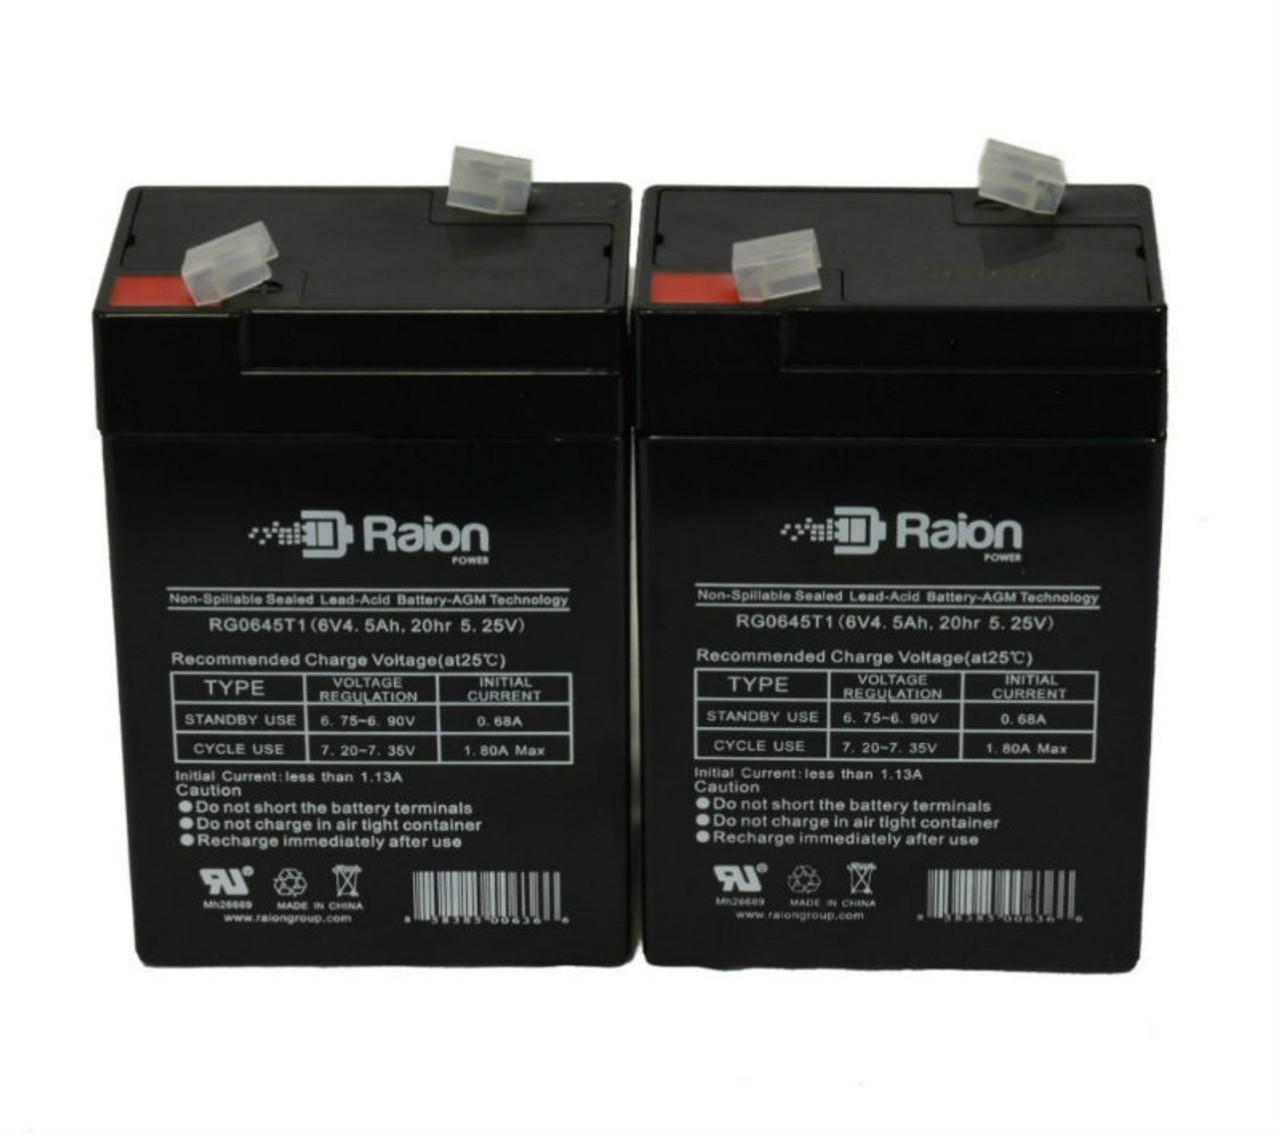 Raion Power 6V 4.5Ah Replacement Emergency Light Battery for Sure-Lites SL26117SP - 2 Pack